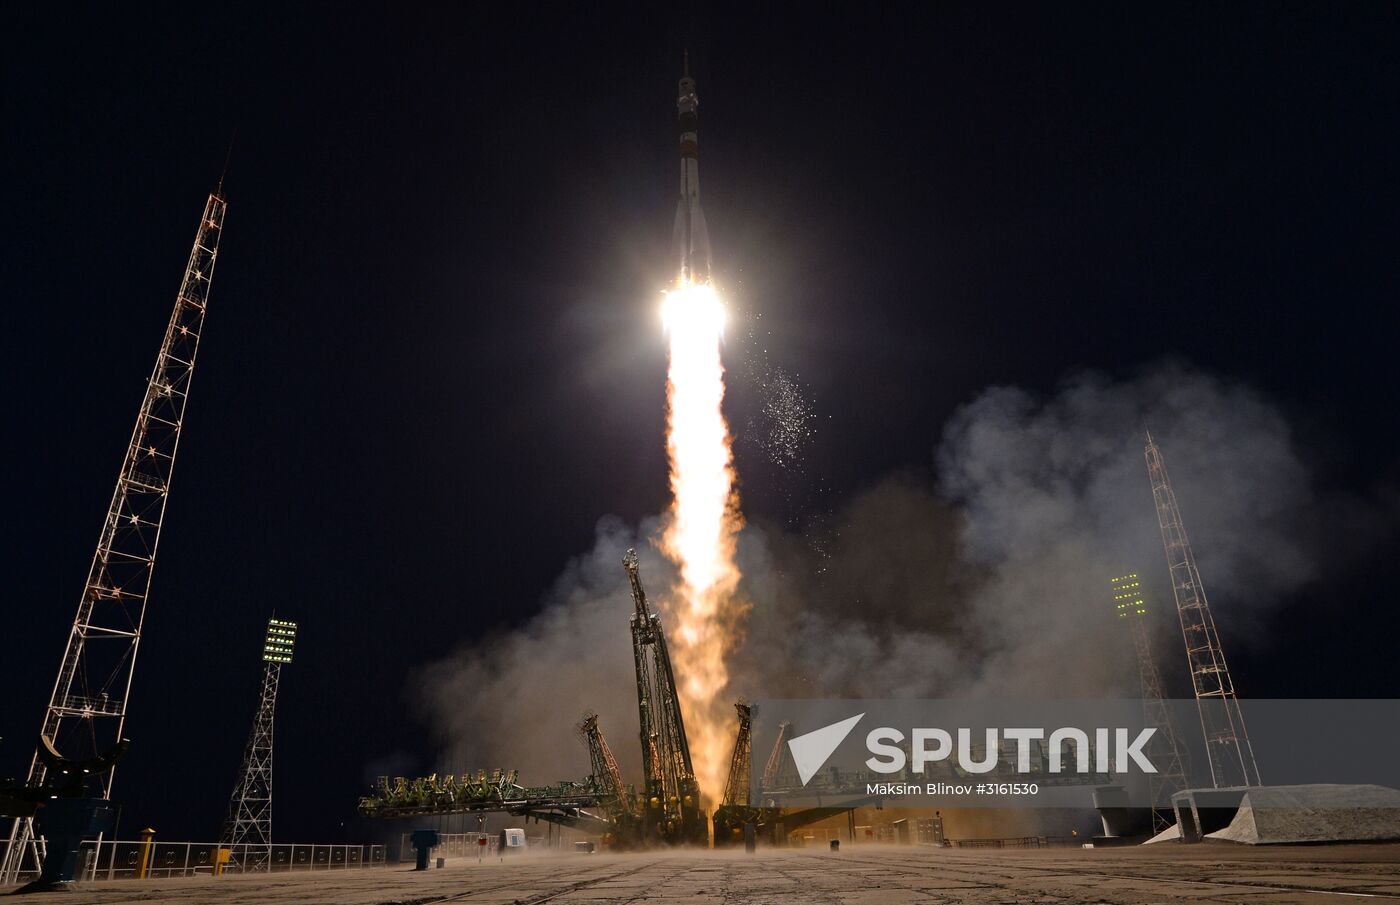 Soyuz MS-05 manned spacecraft launched with ISS expedition 52/53 crew